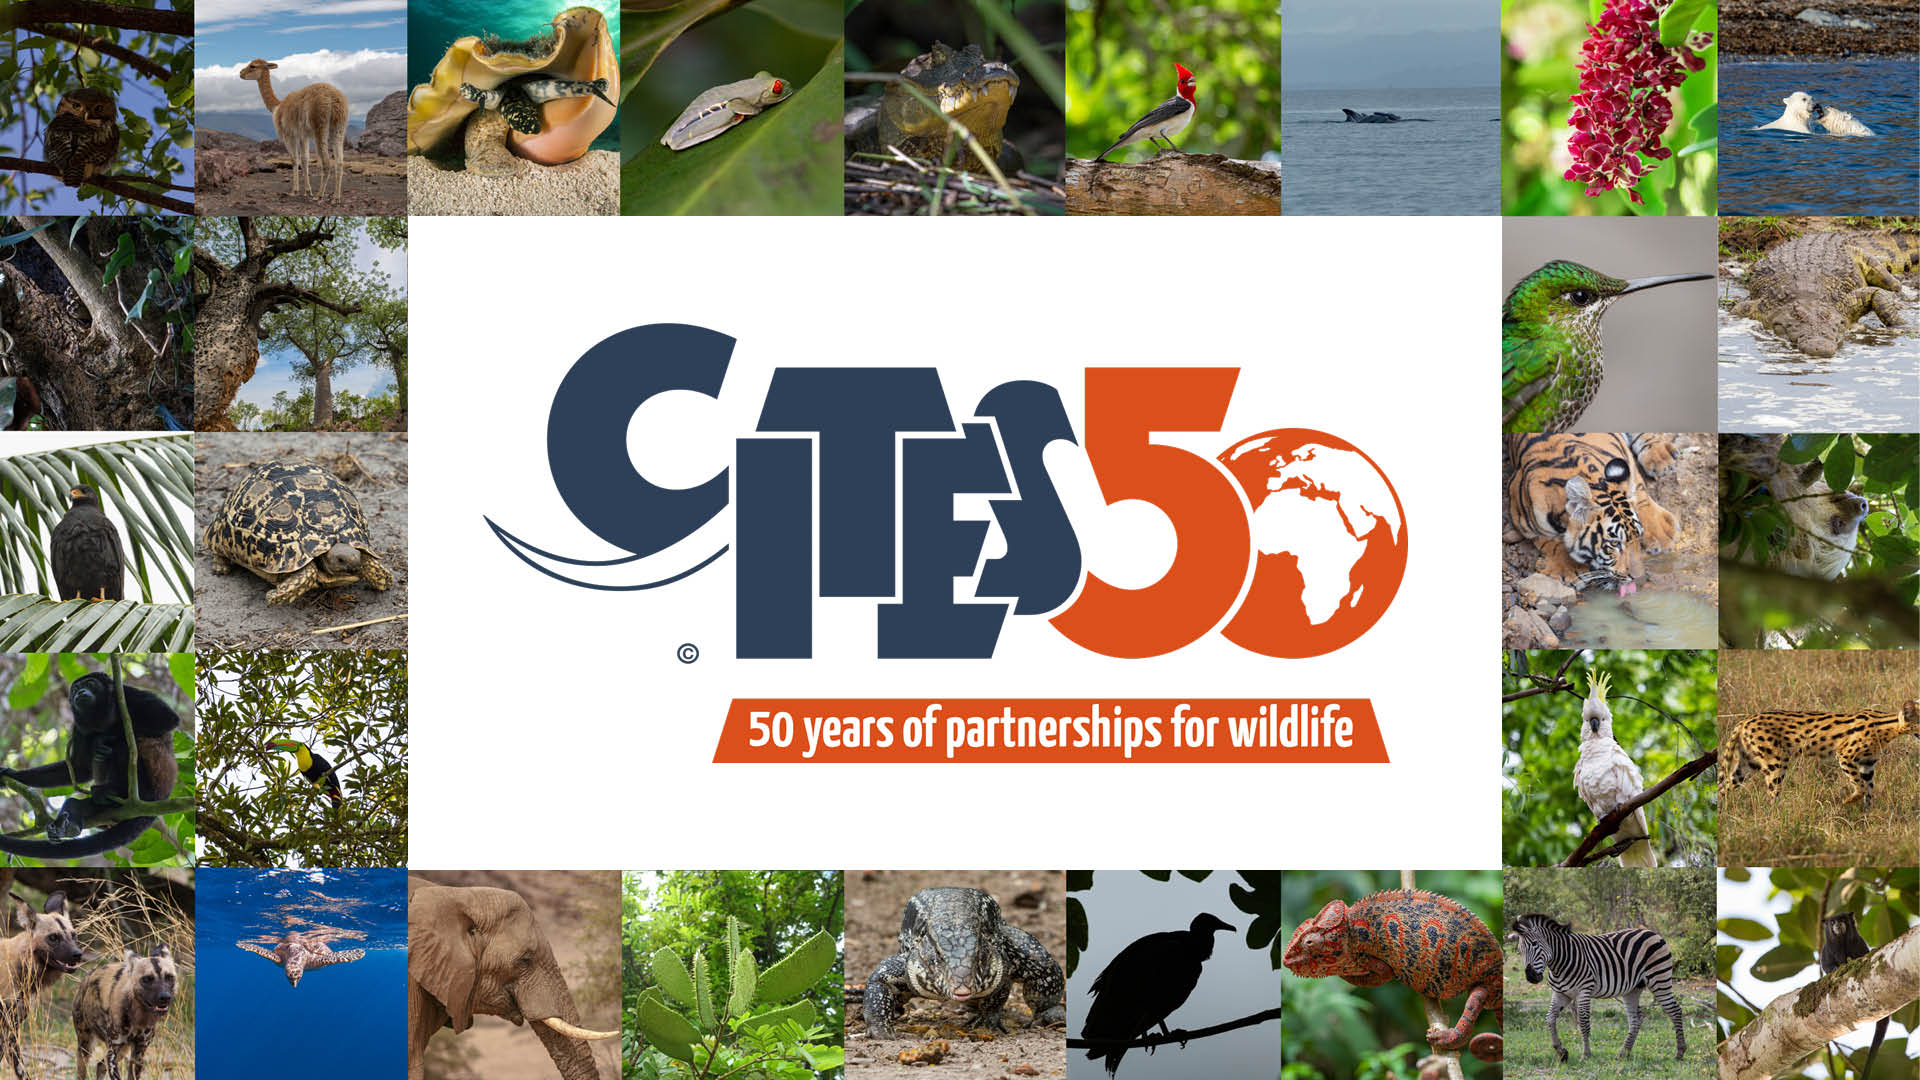 cites 50 years (animals covered by CITES in background with CITES logo overlayed on top)